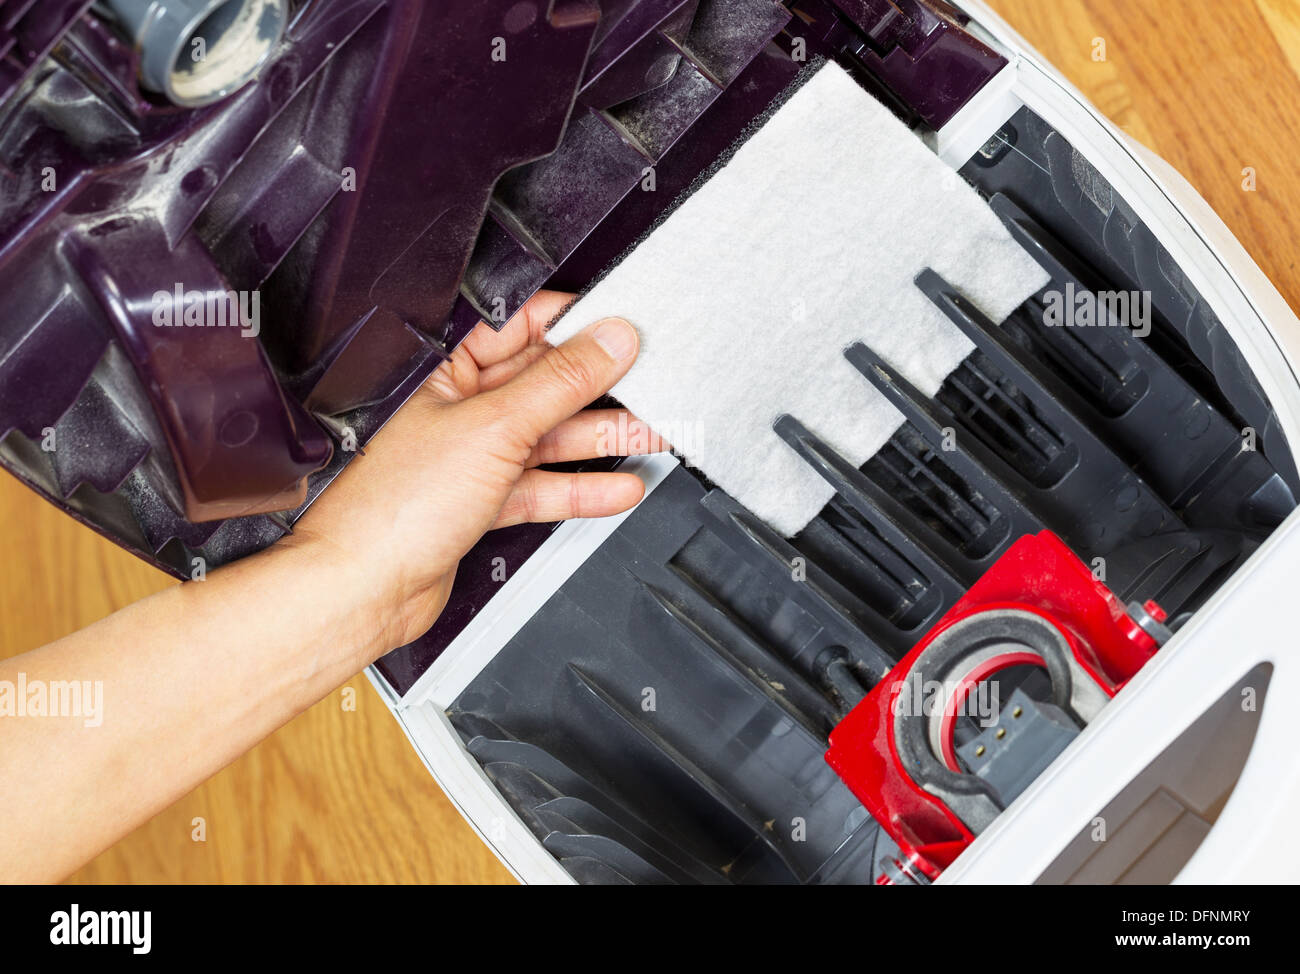 Horizontal photo of female hand installing clean vacuum cleaner filter with hardwood floors in background Stock Photo